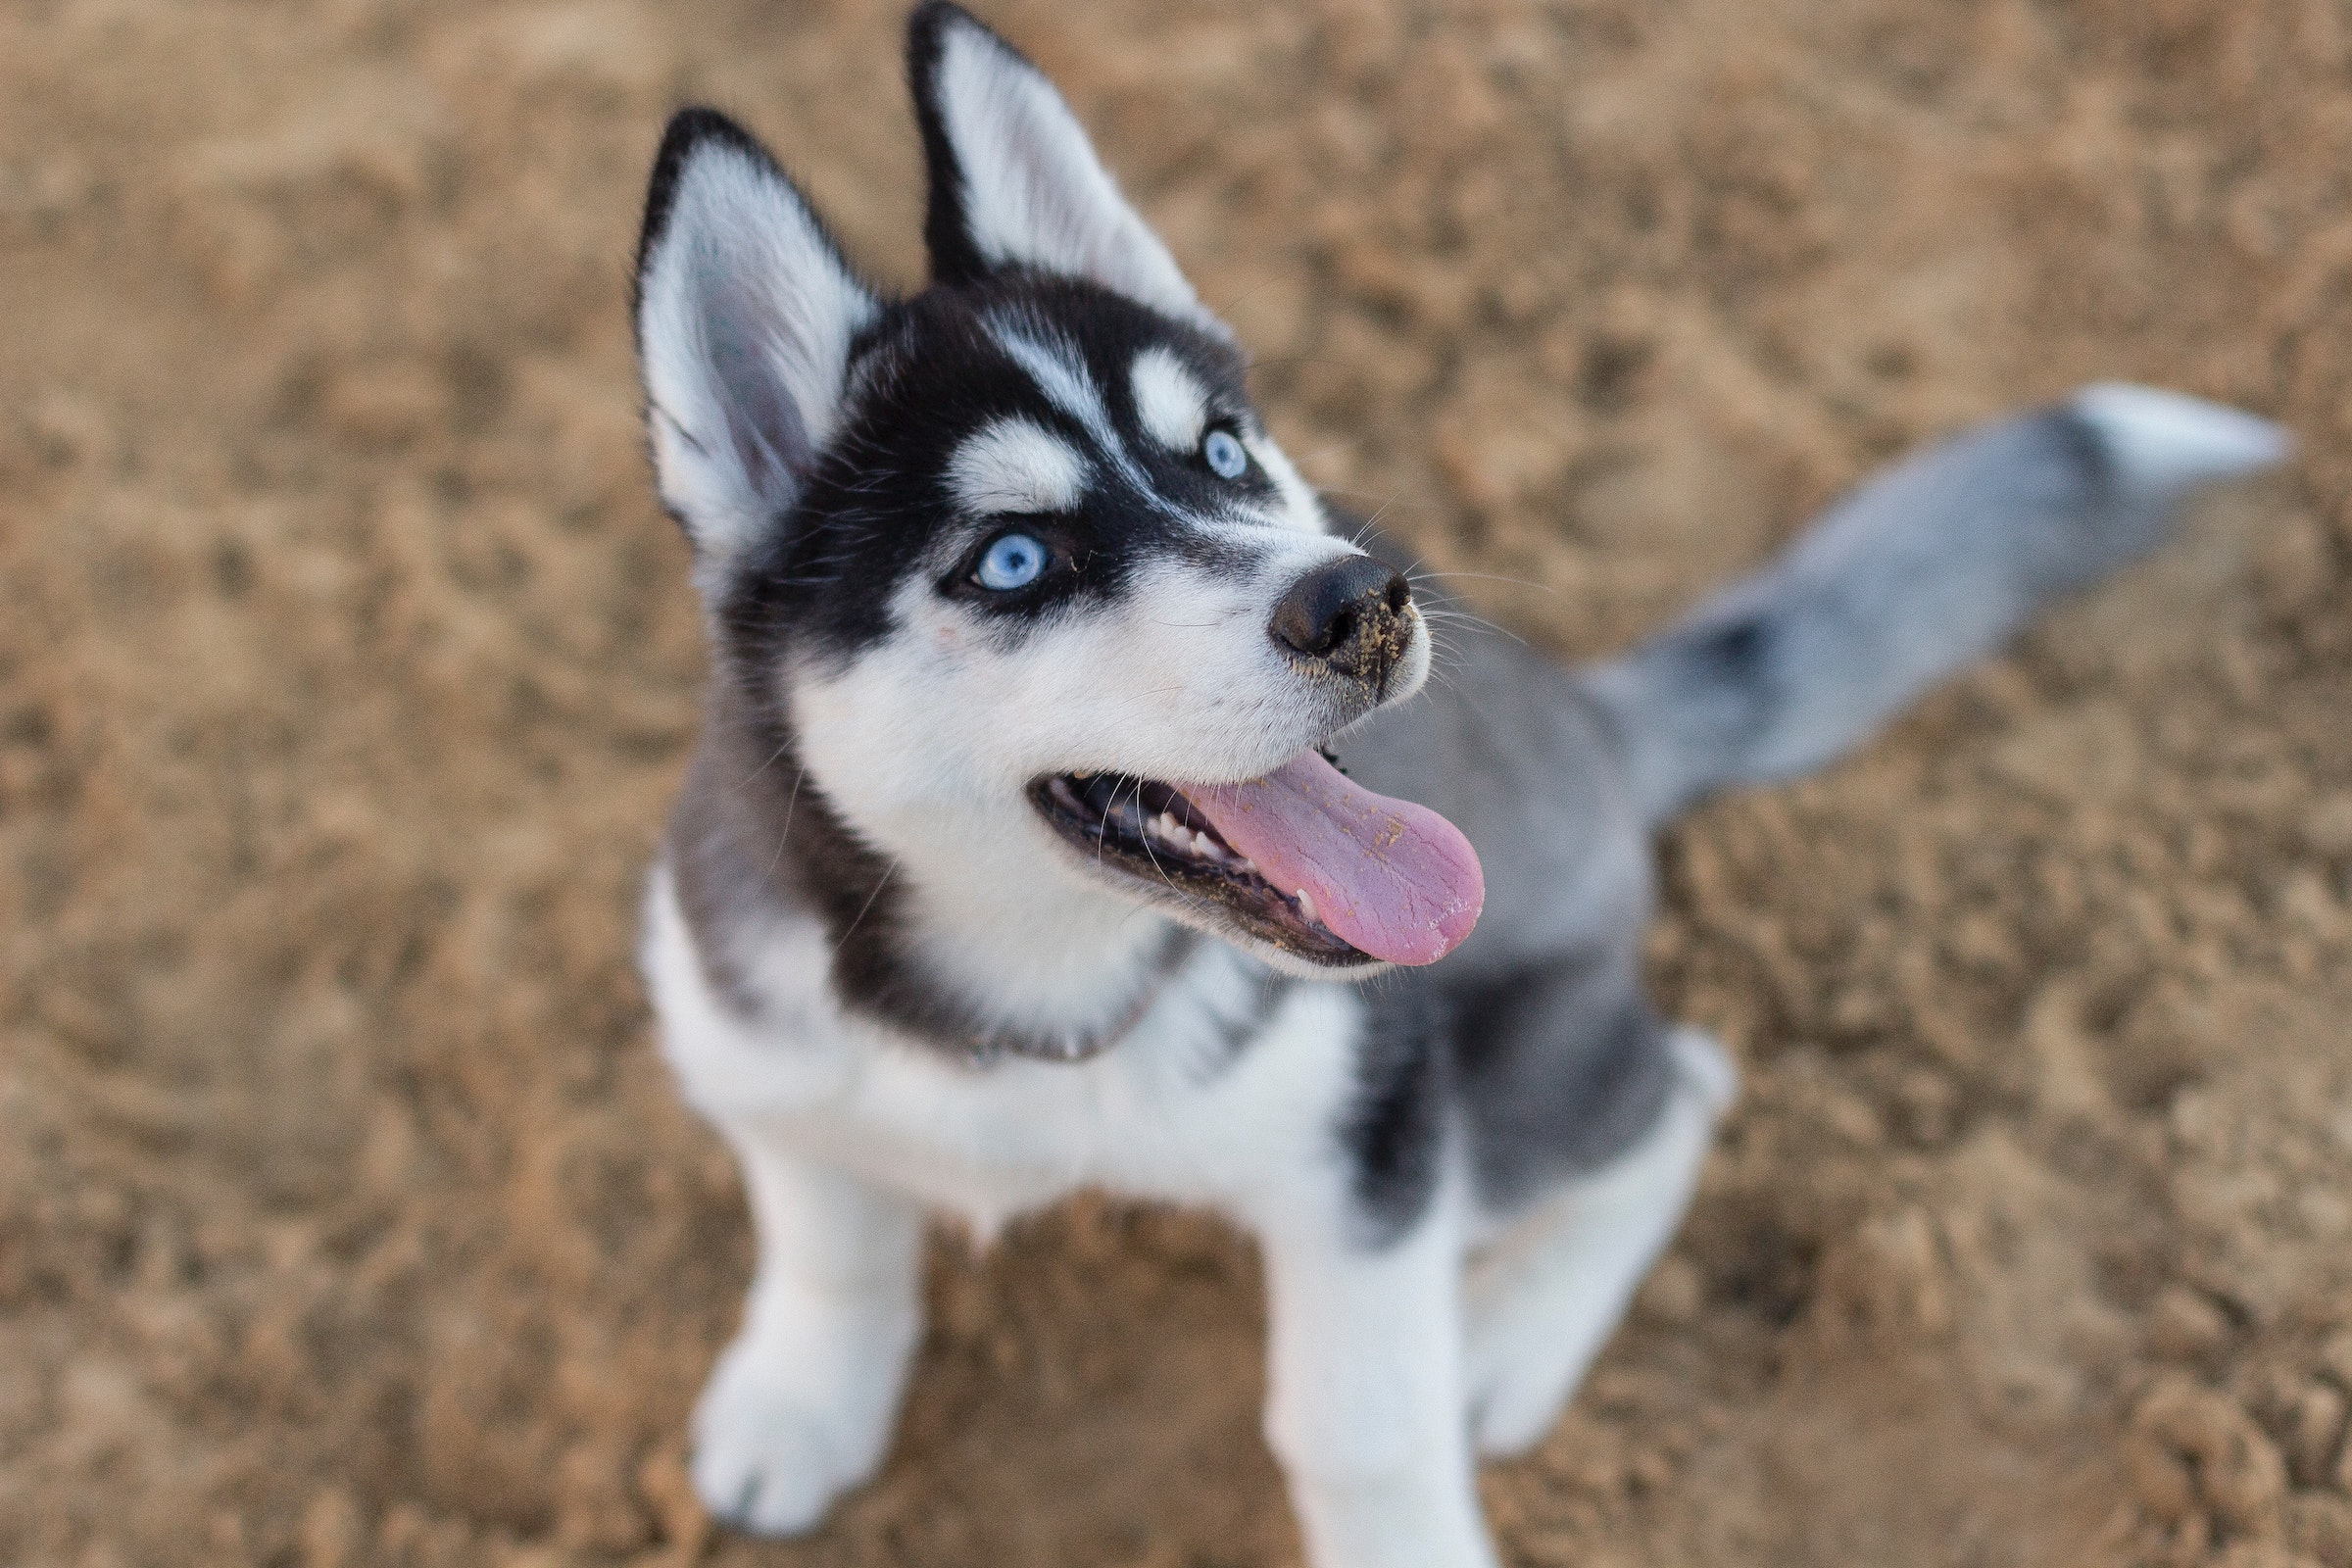 A Siberian husky puppy sits on the ground and looks up